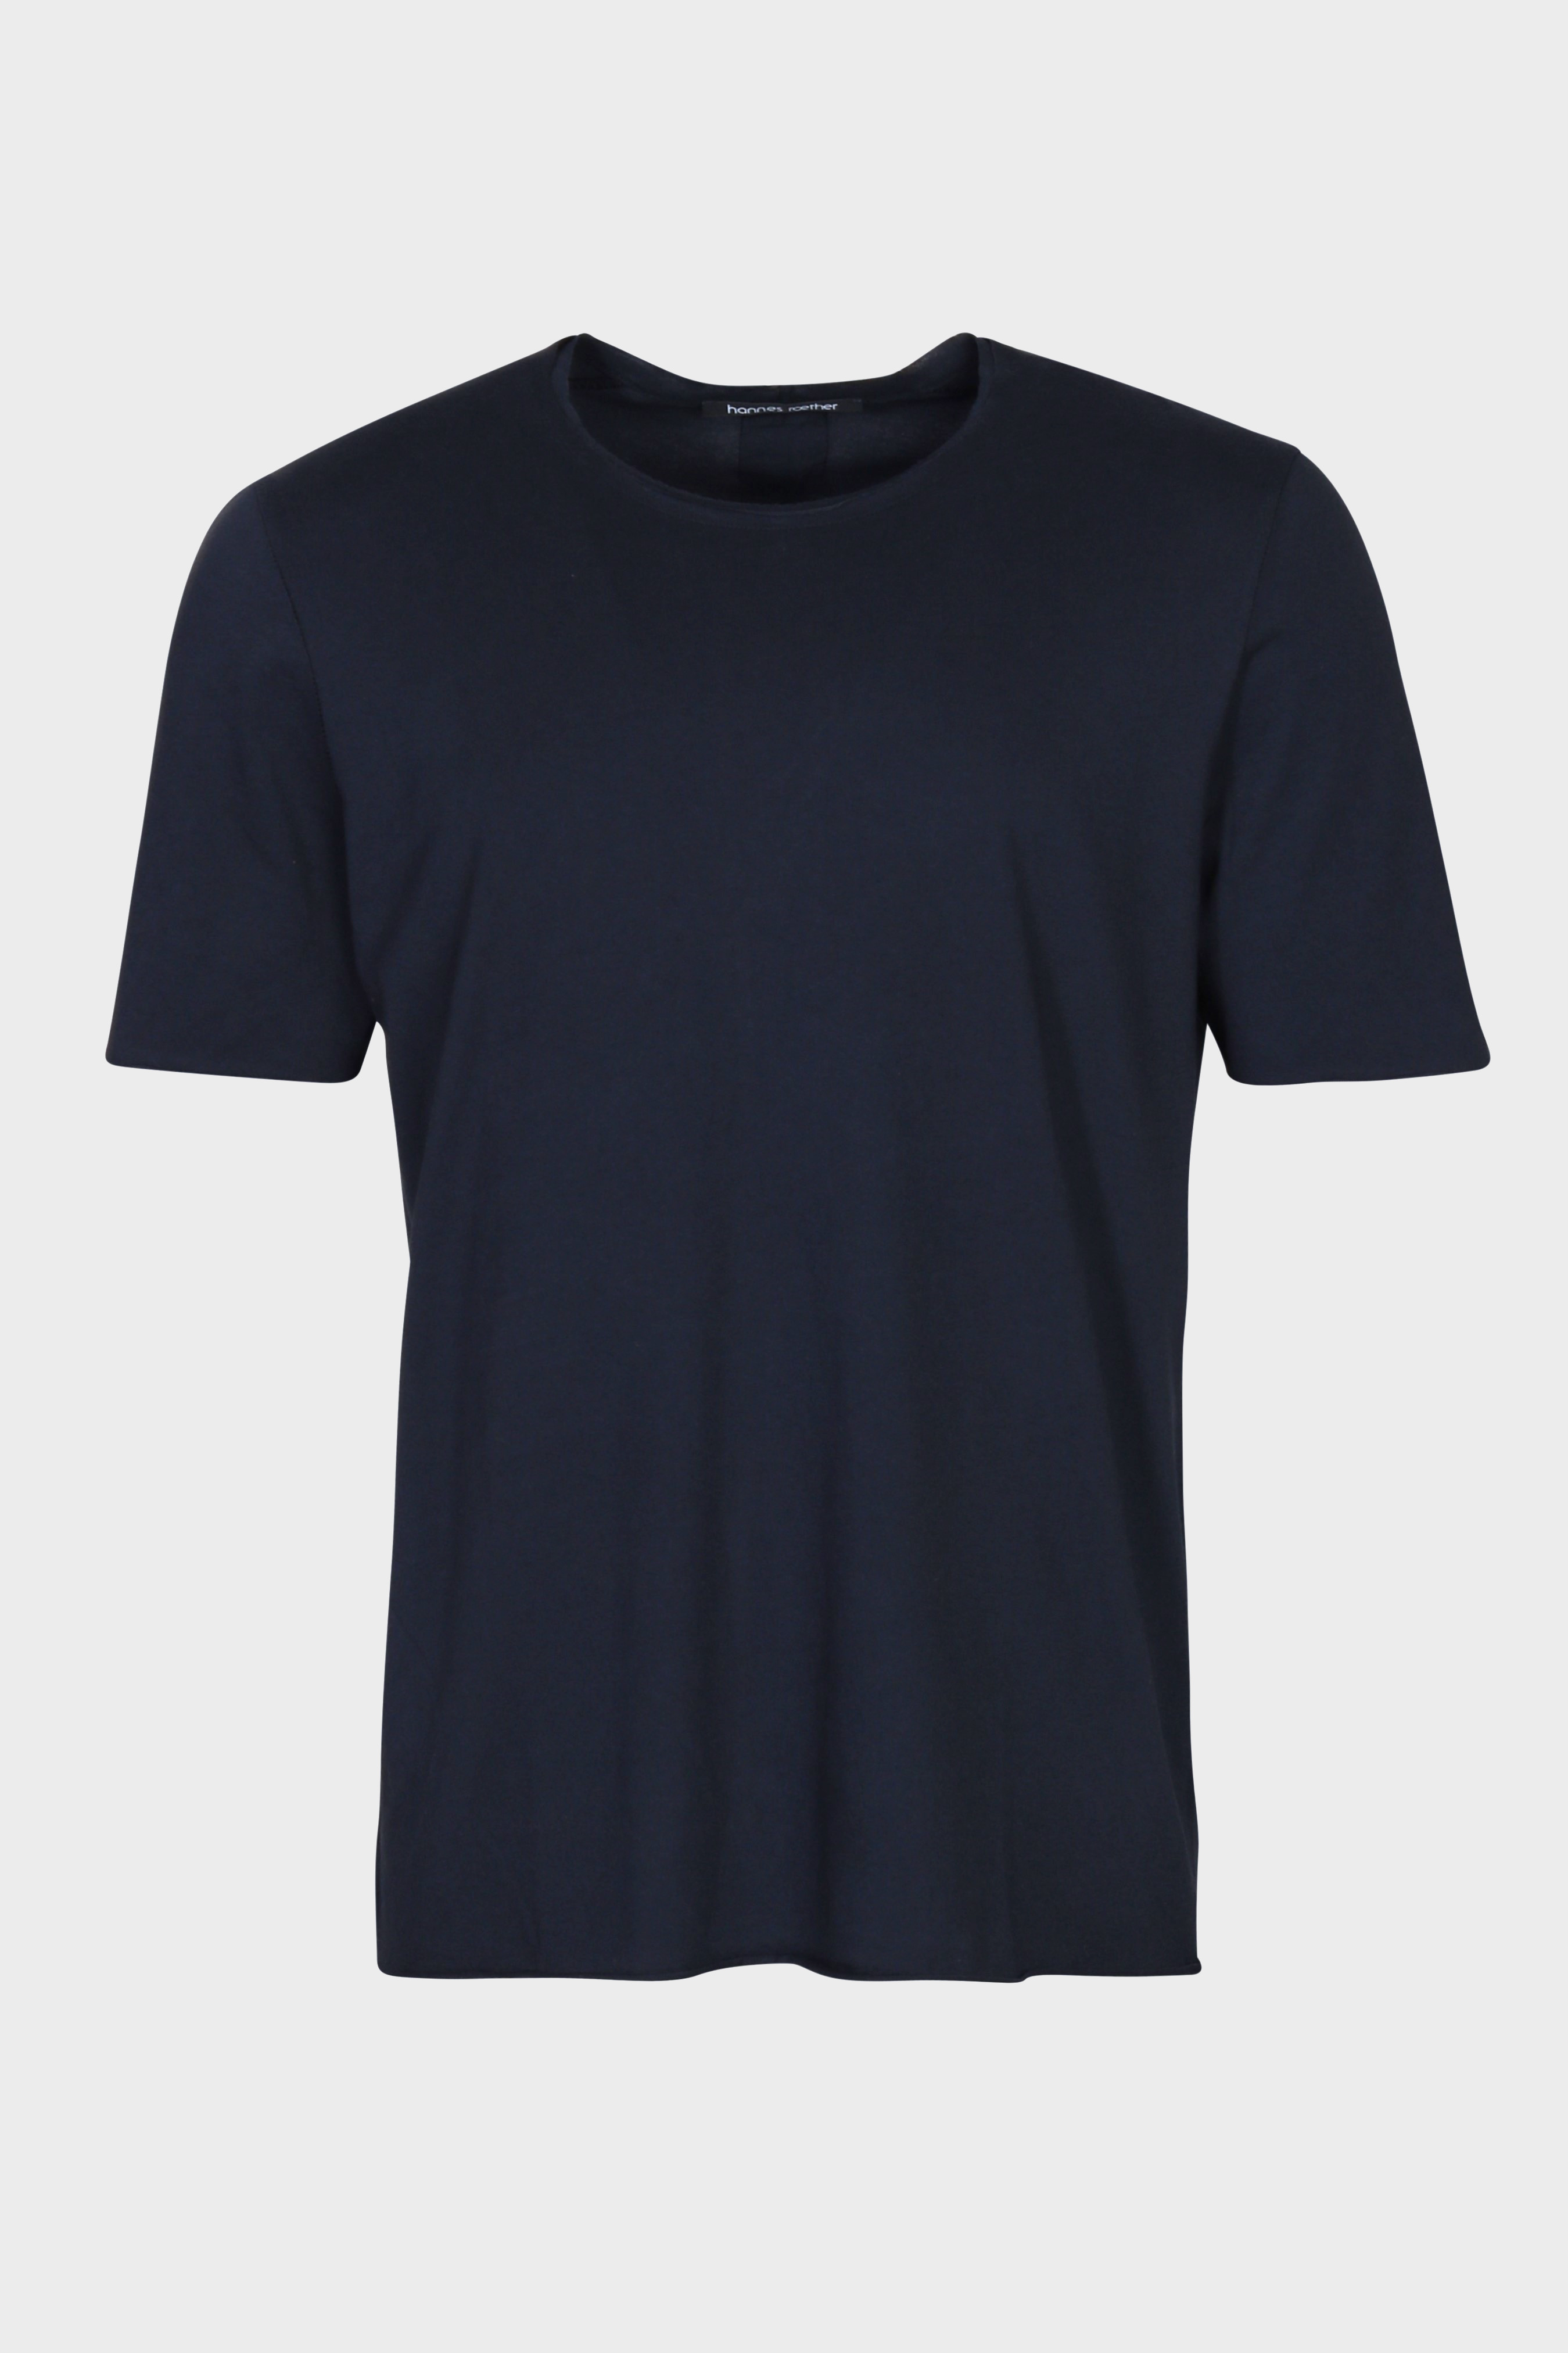 HANNES ROETHER T-Shirt in Navy 2XL